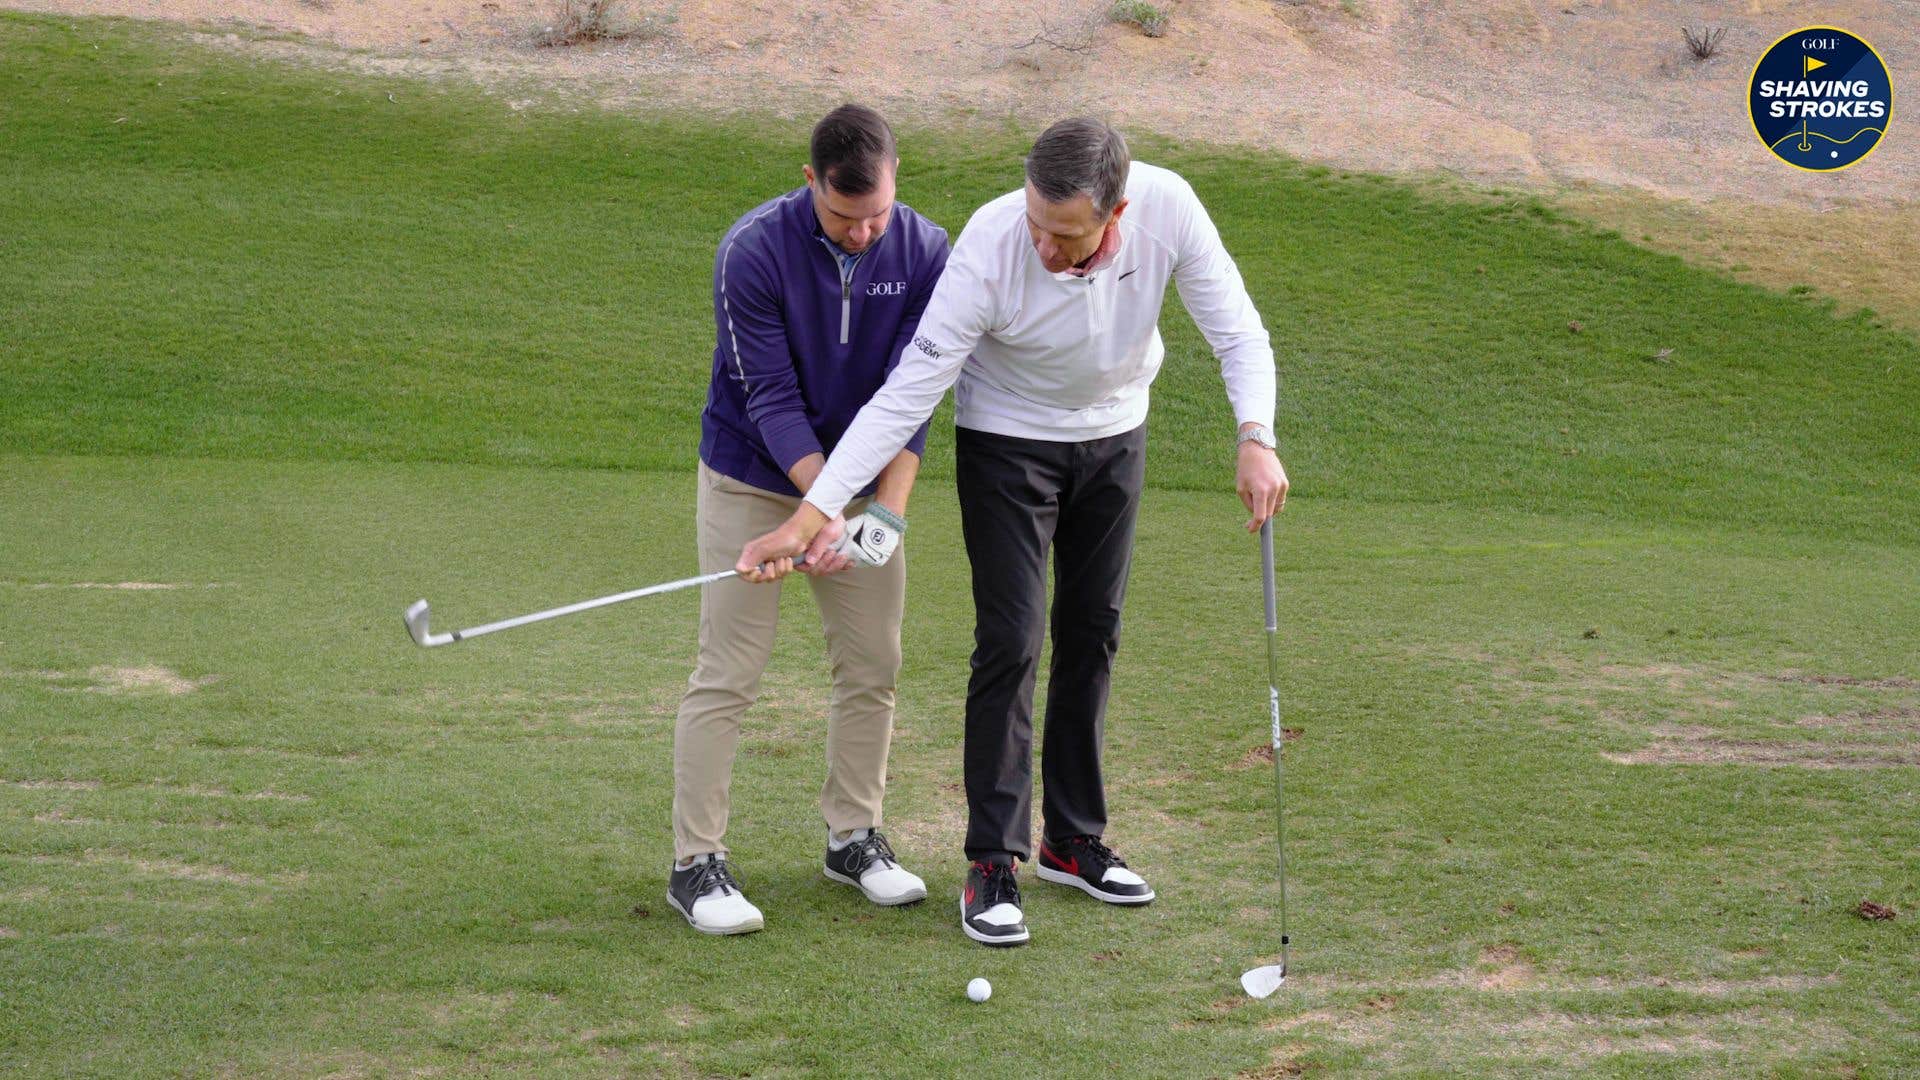 Use this divot drill for better ball contact